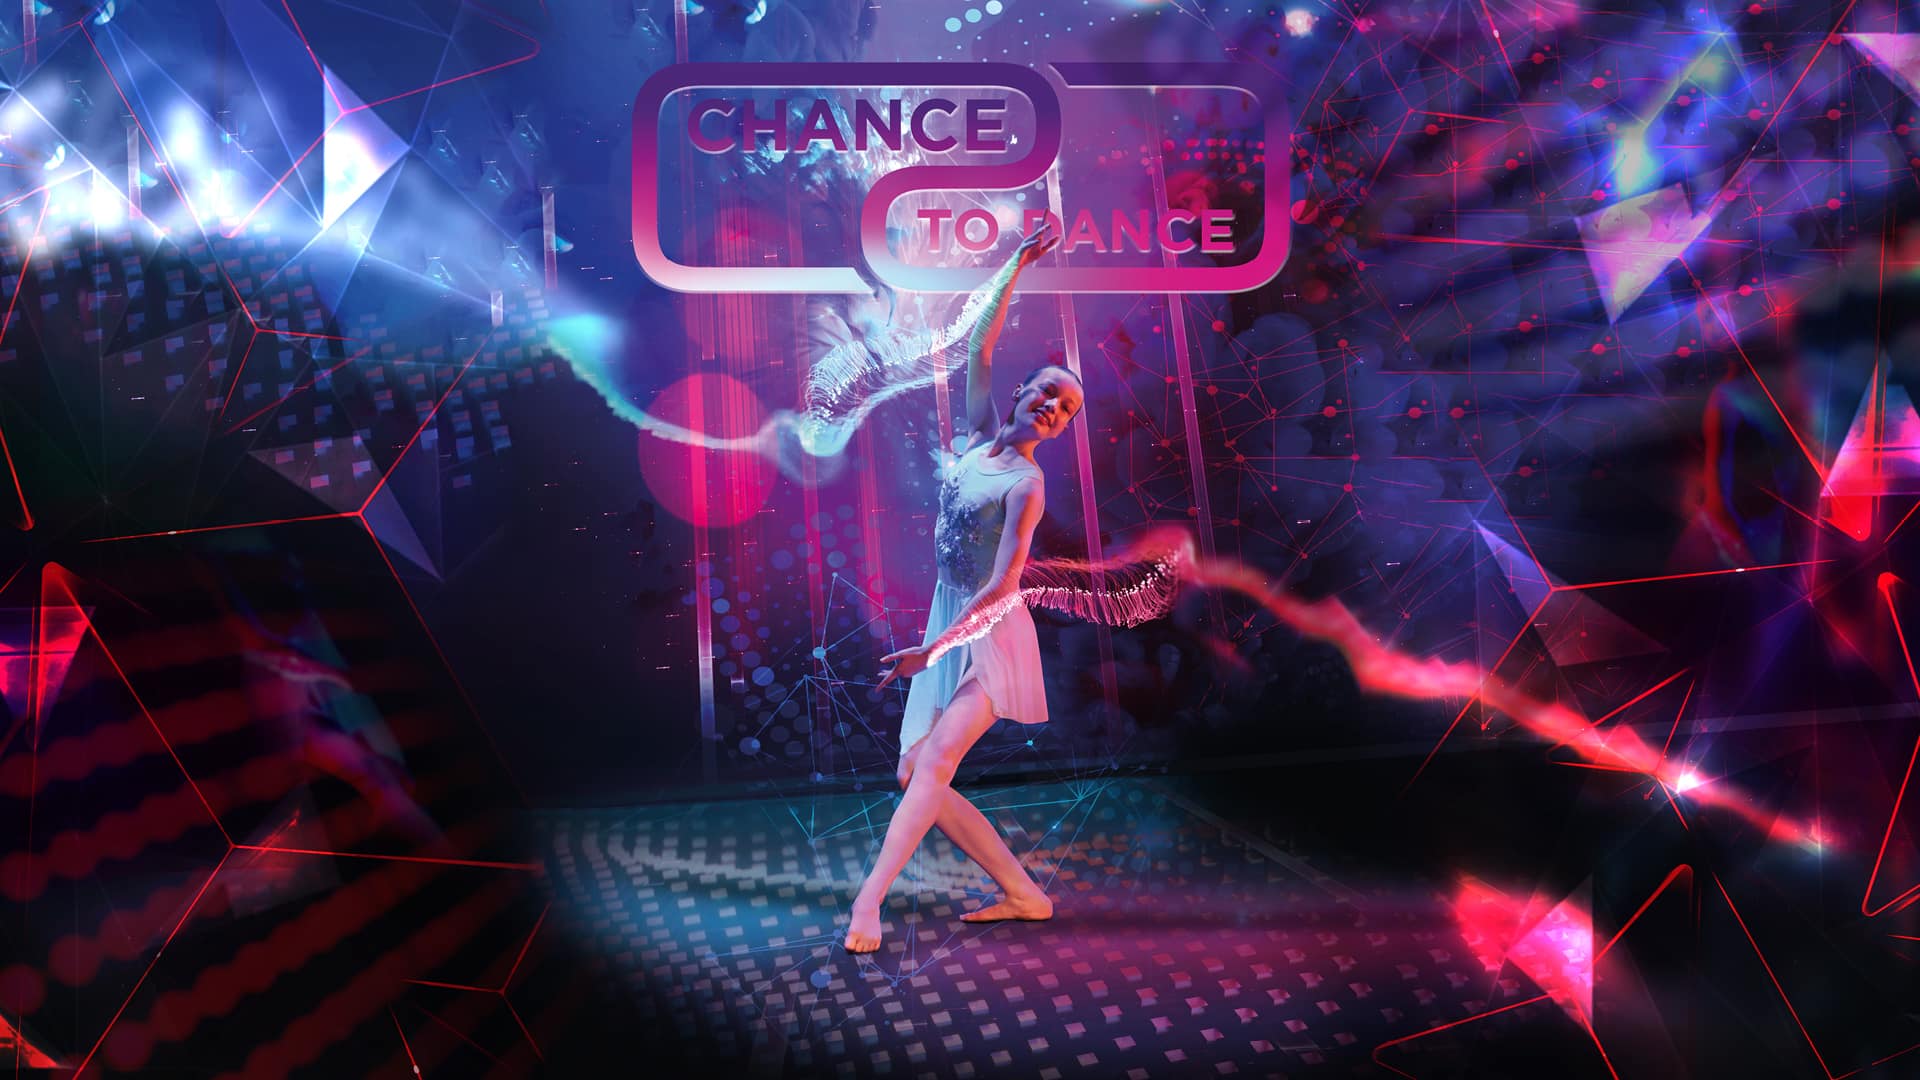 Chance To Dance 2023 promotional image - A young female dancer in a ballet dress dancing, in blue and red light. There are lots of shapes floating around the image and text reading: 'Chance To Dance'.